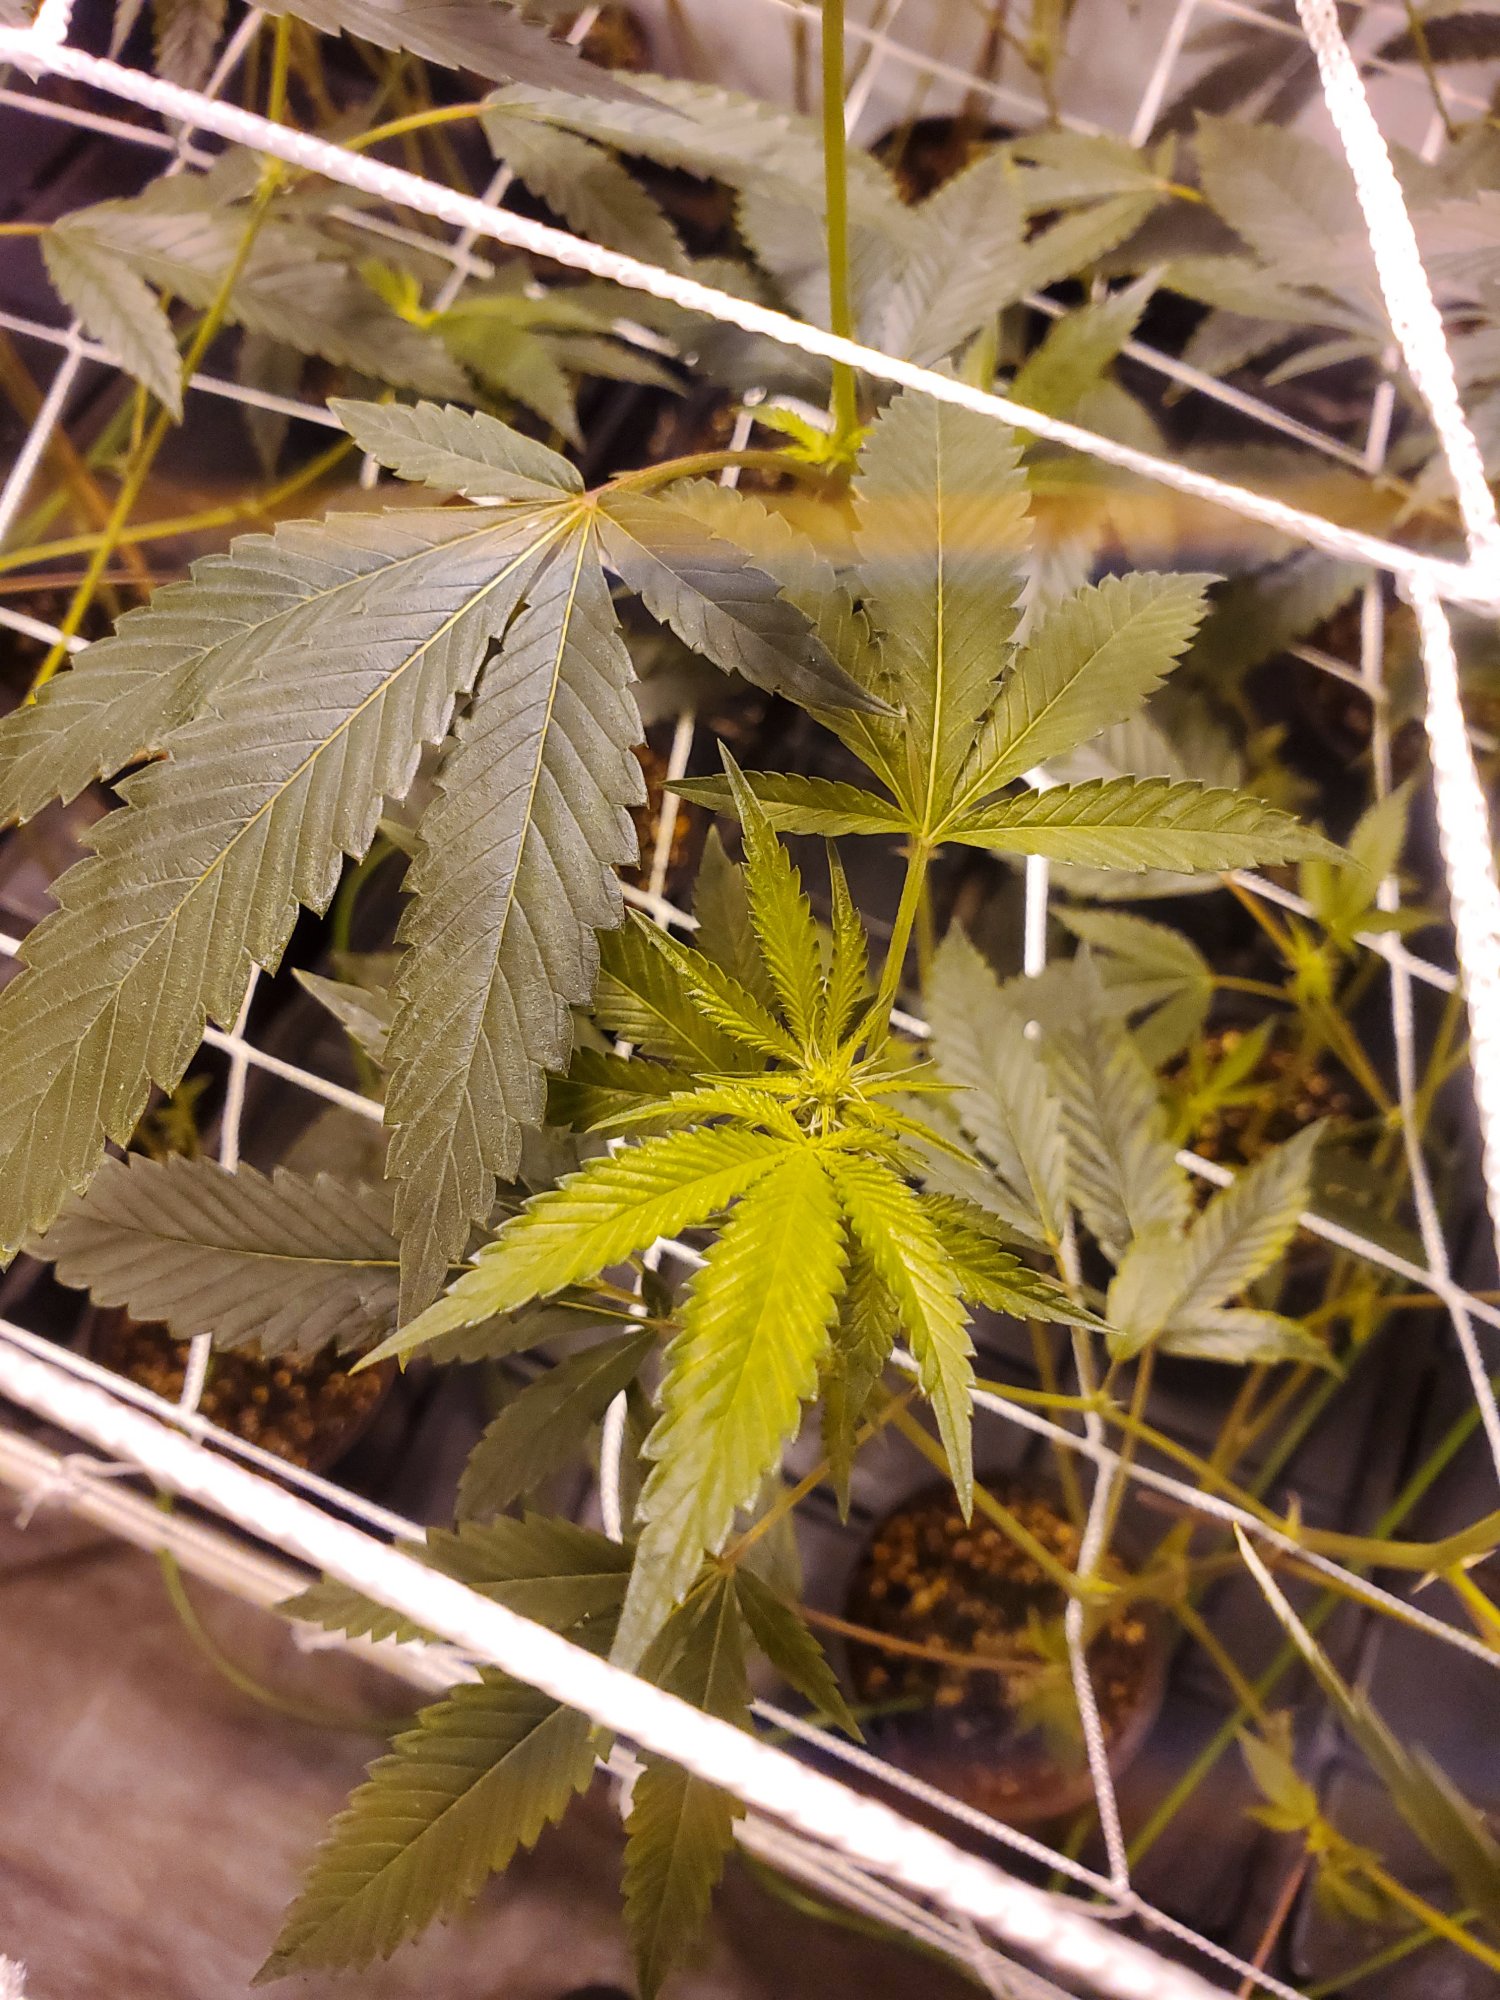 Yellowing of top bud sites 2